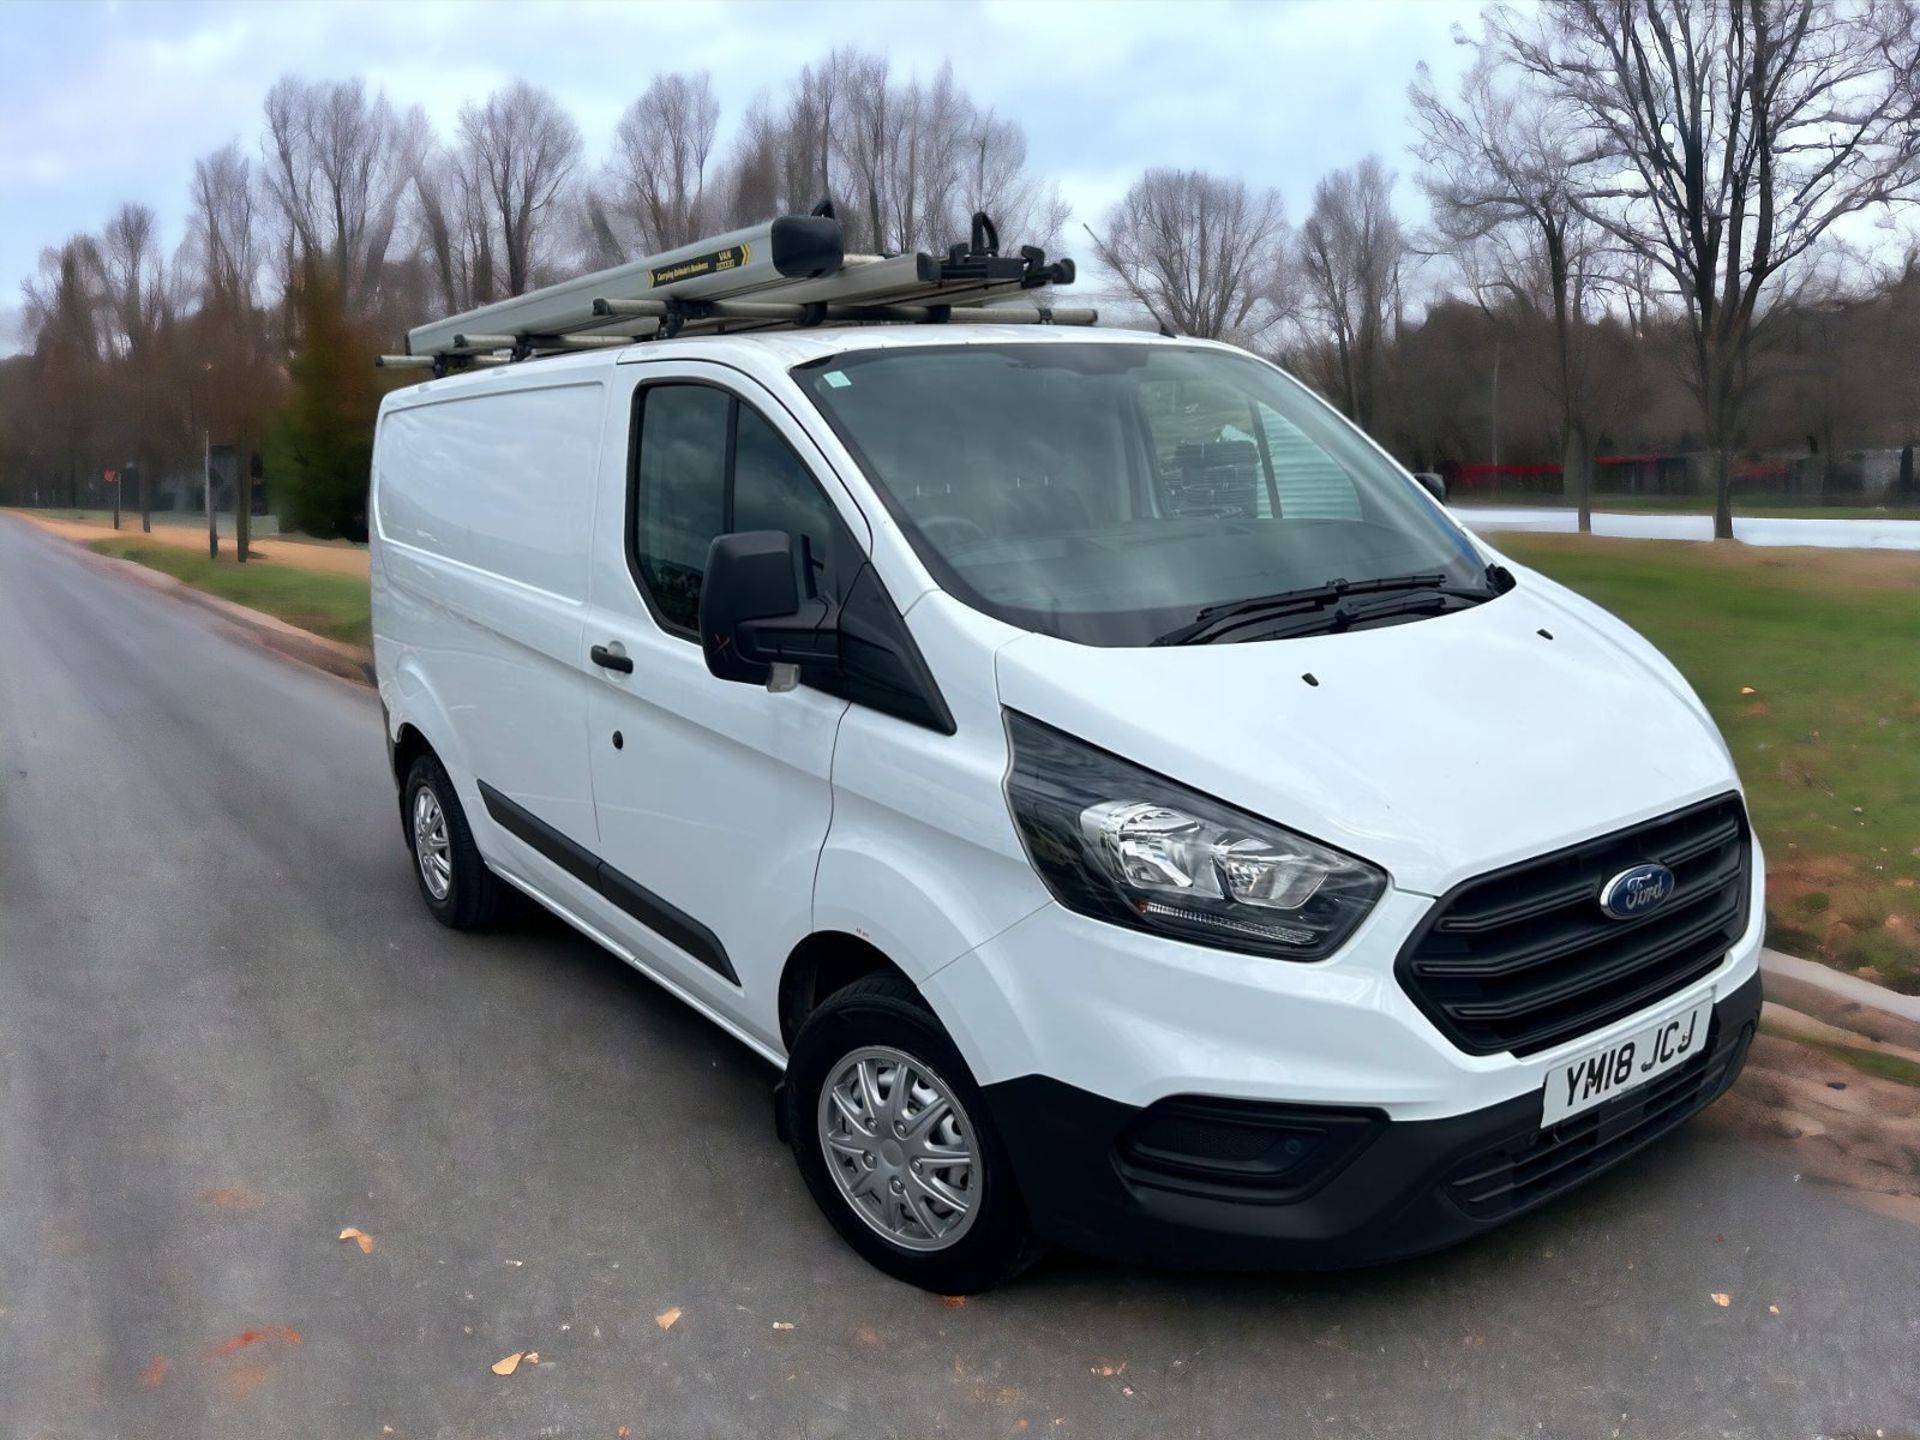 2018-18 REG FORD TRANSIT CUSTOM 280 SWB L1H1- HPI CLEAR - READY FOR ACTION ! - Image 3 of 15